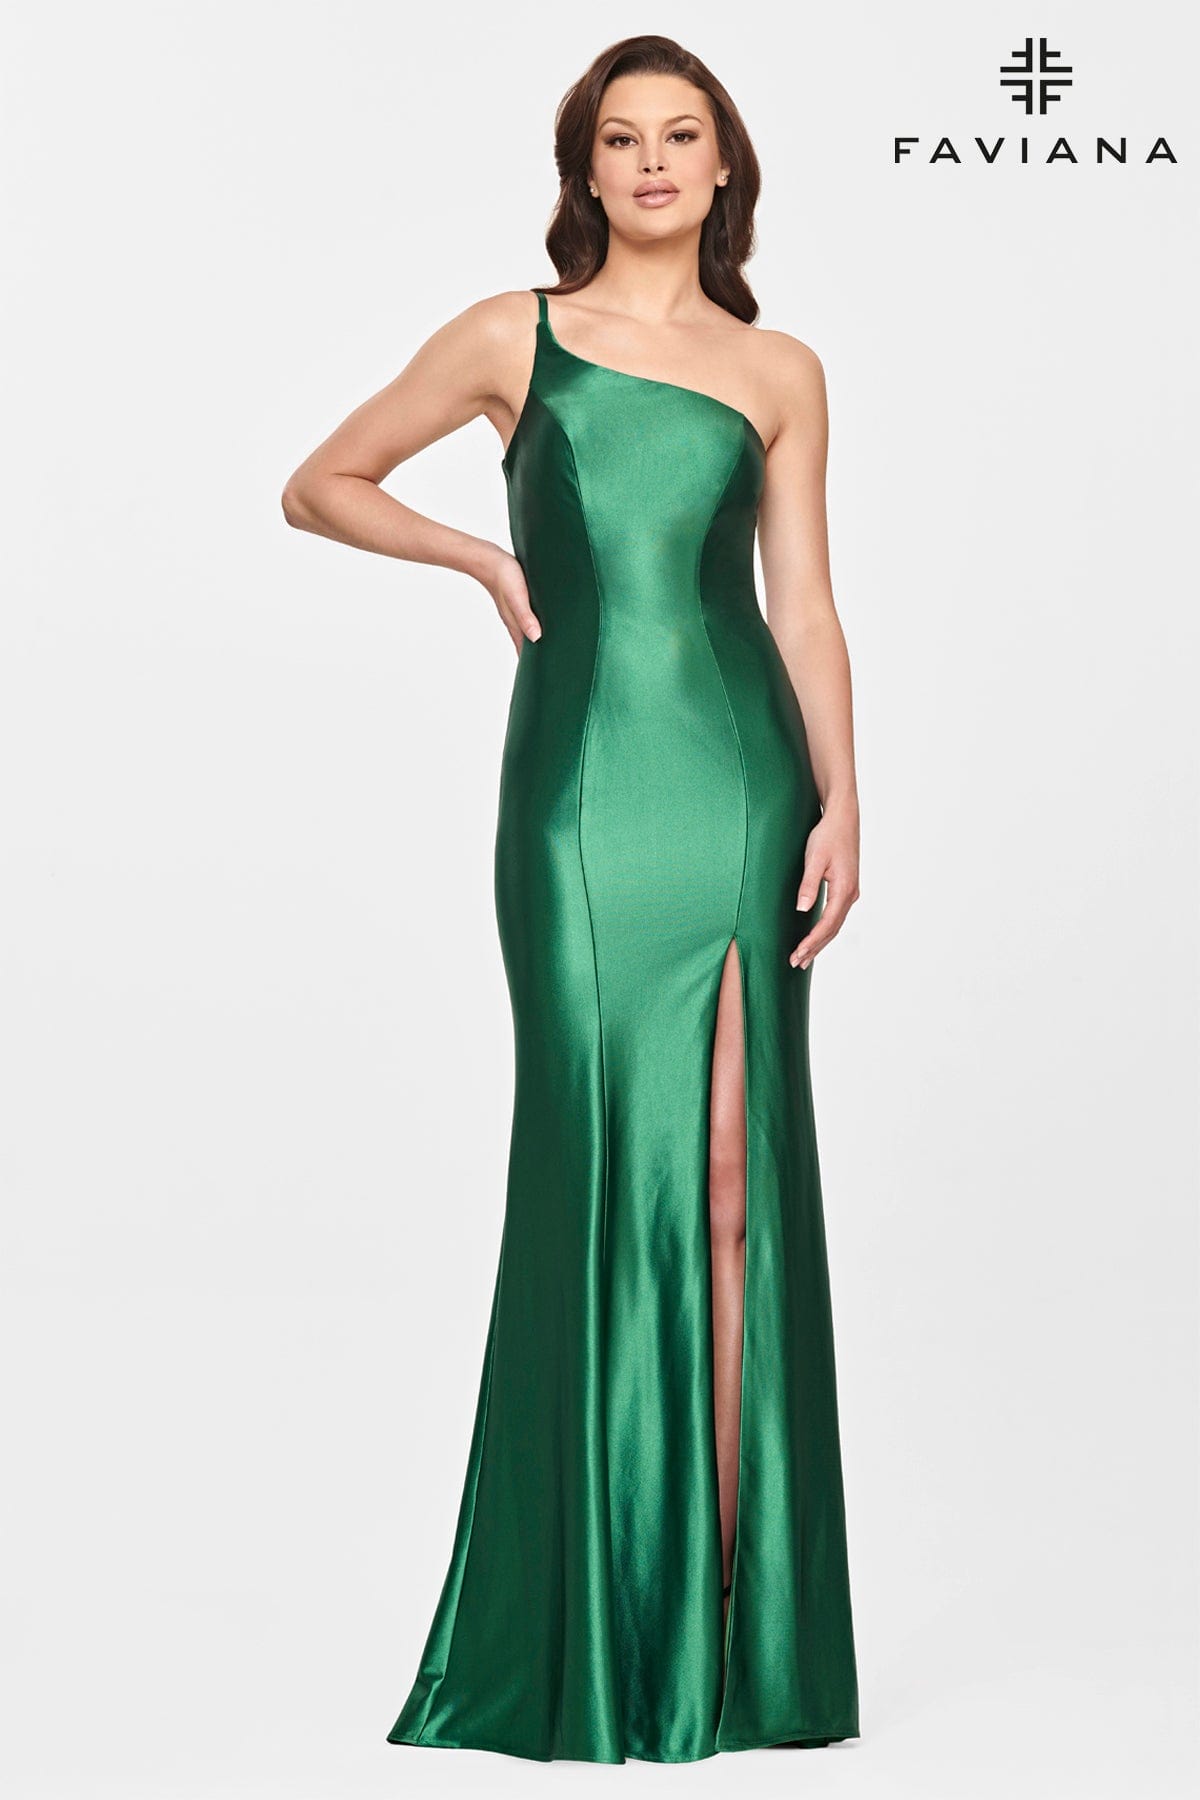 One Shoulder Formal Dress Long With Leg Slit And Stretch Satin Fabric